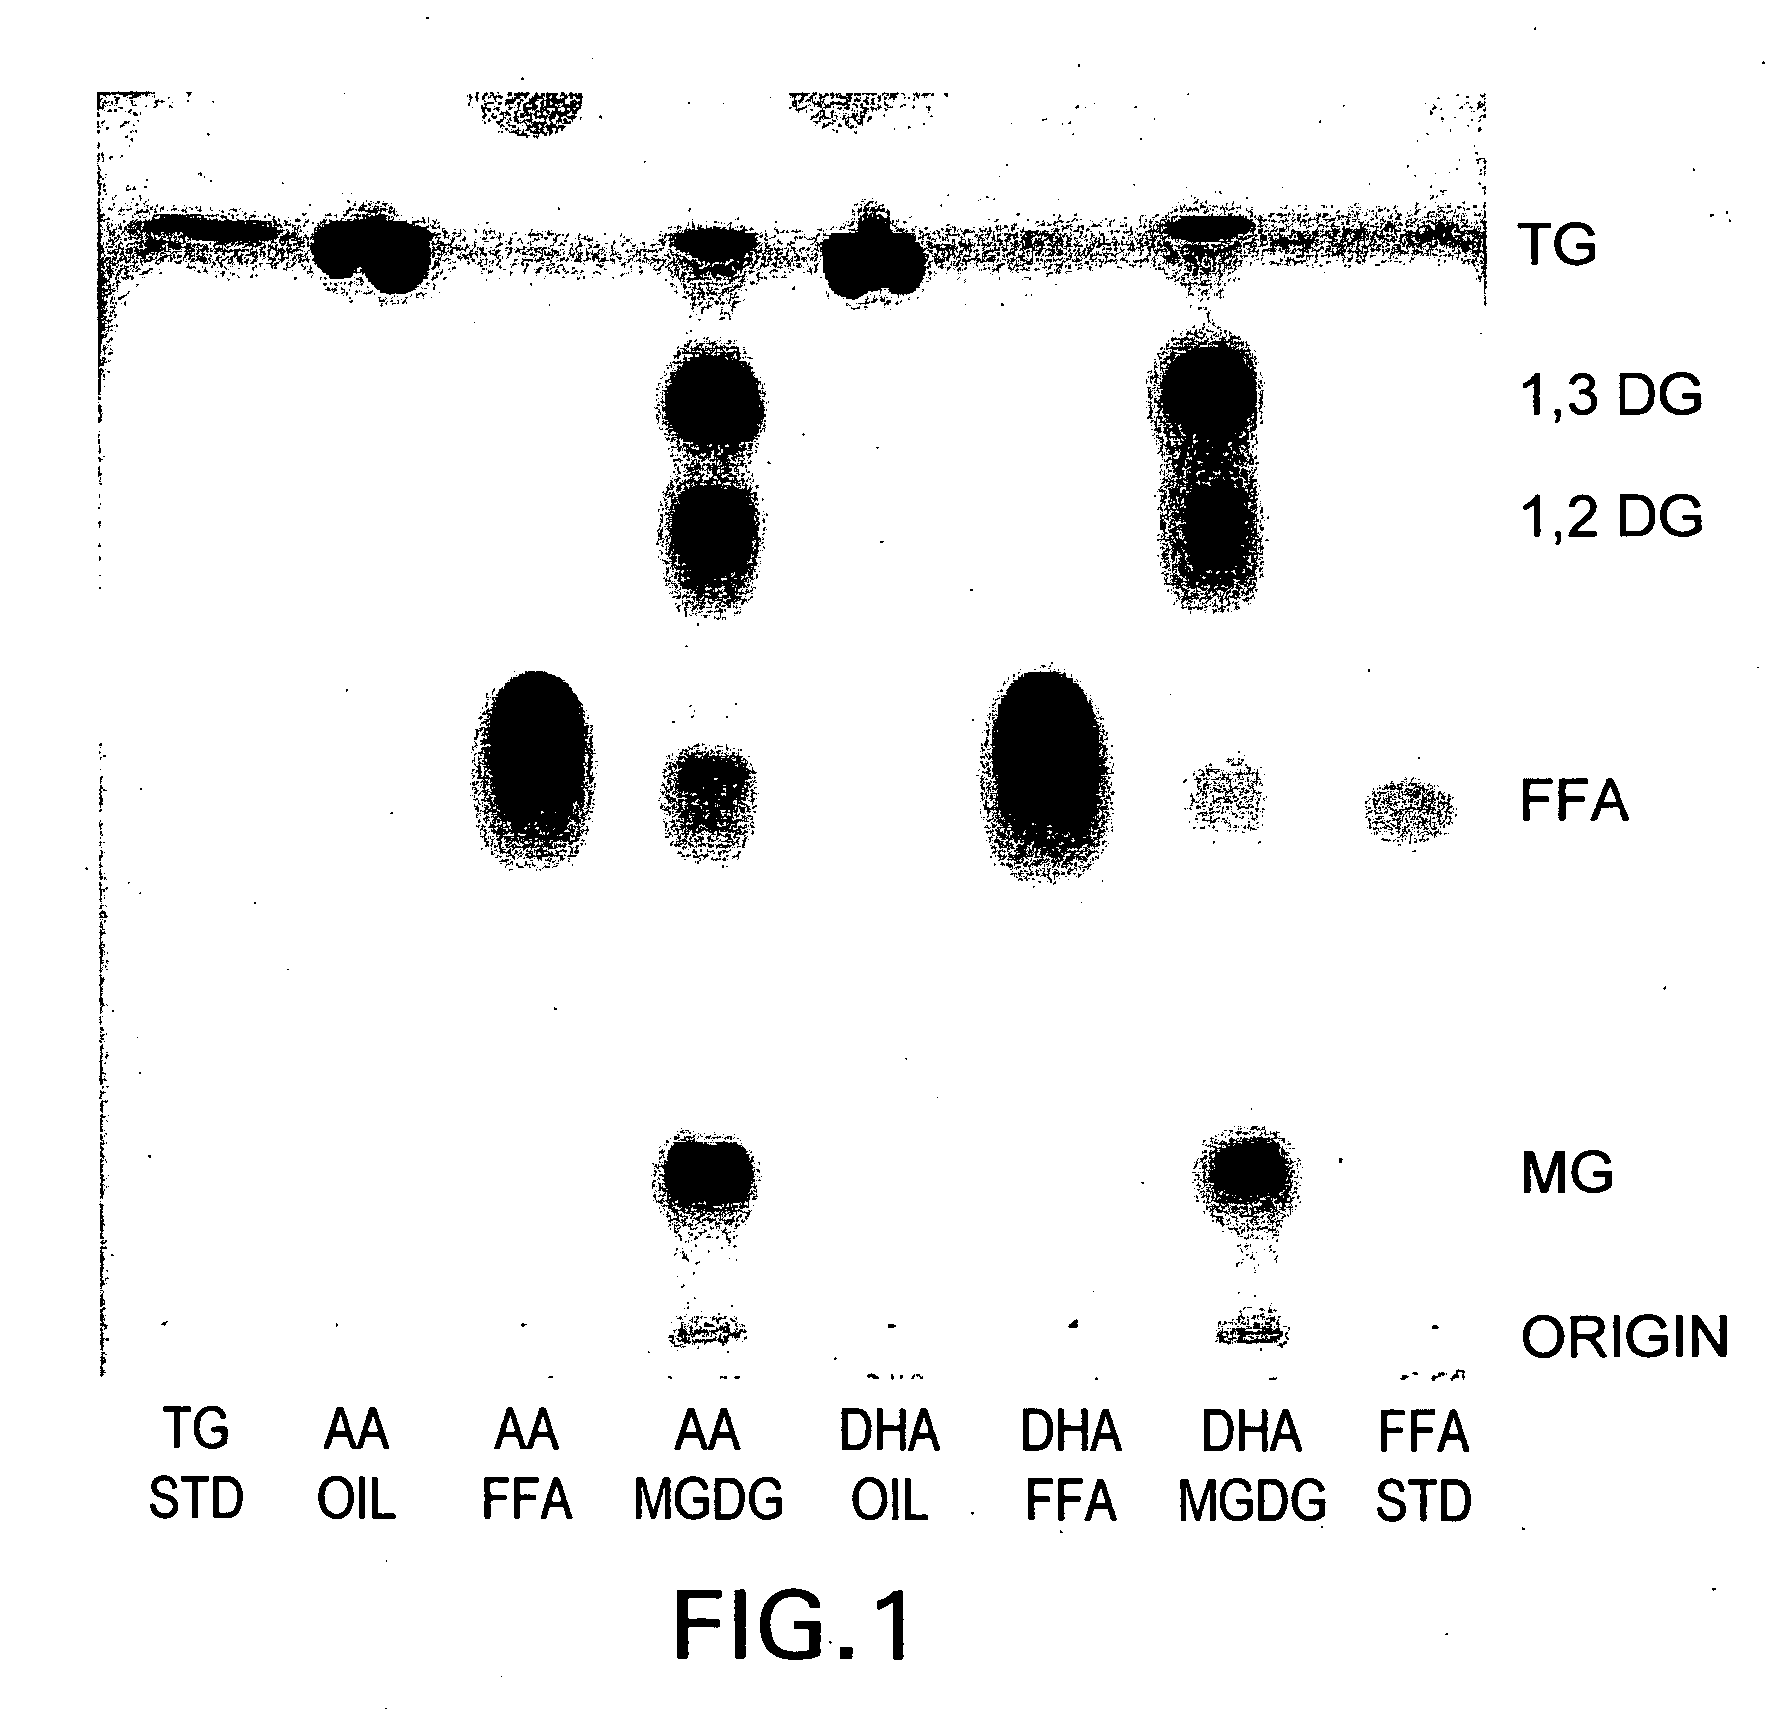 Glyceride compositions and methods of making and using same